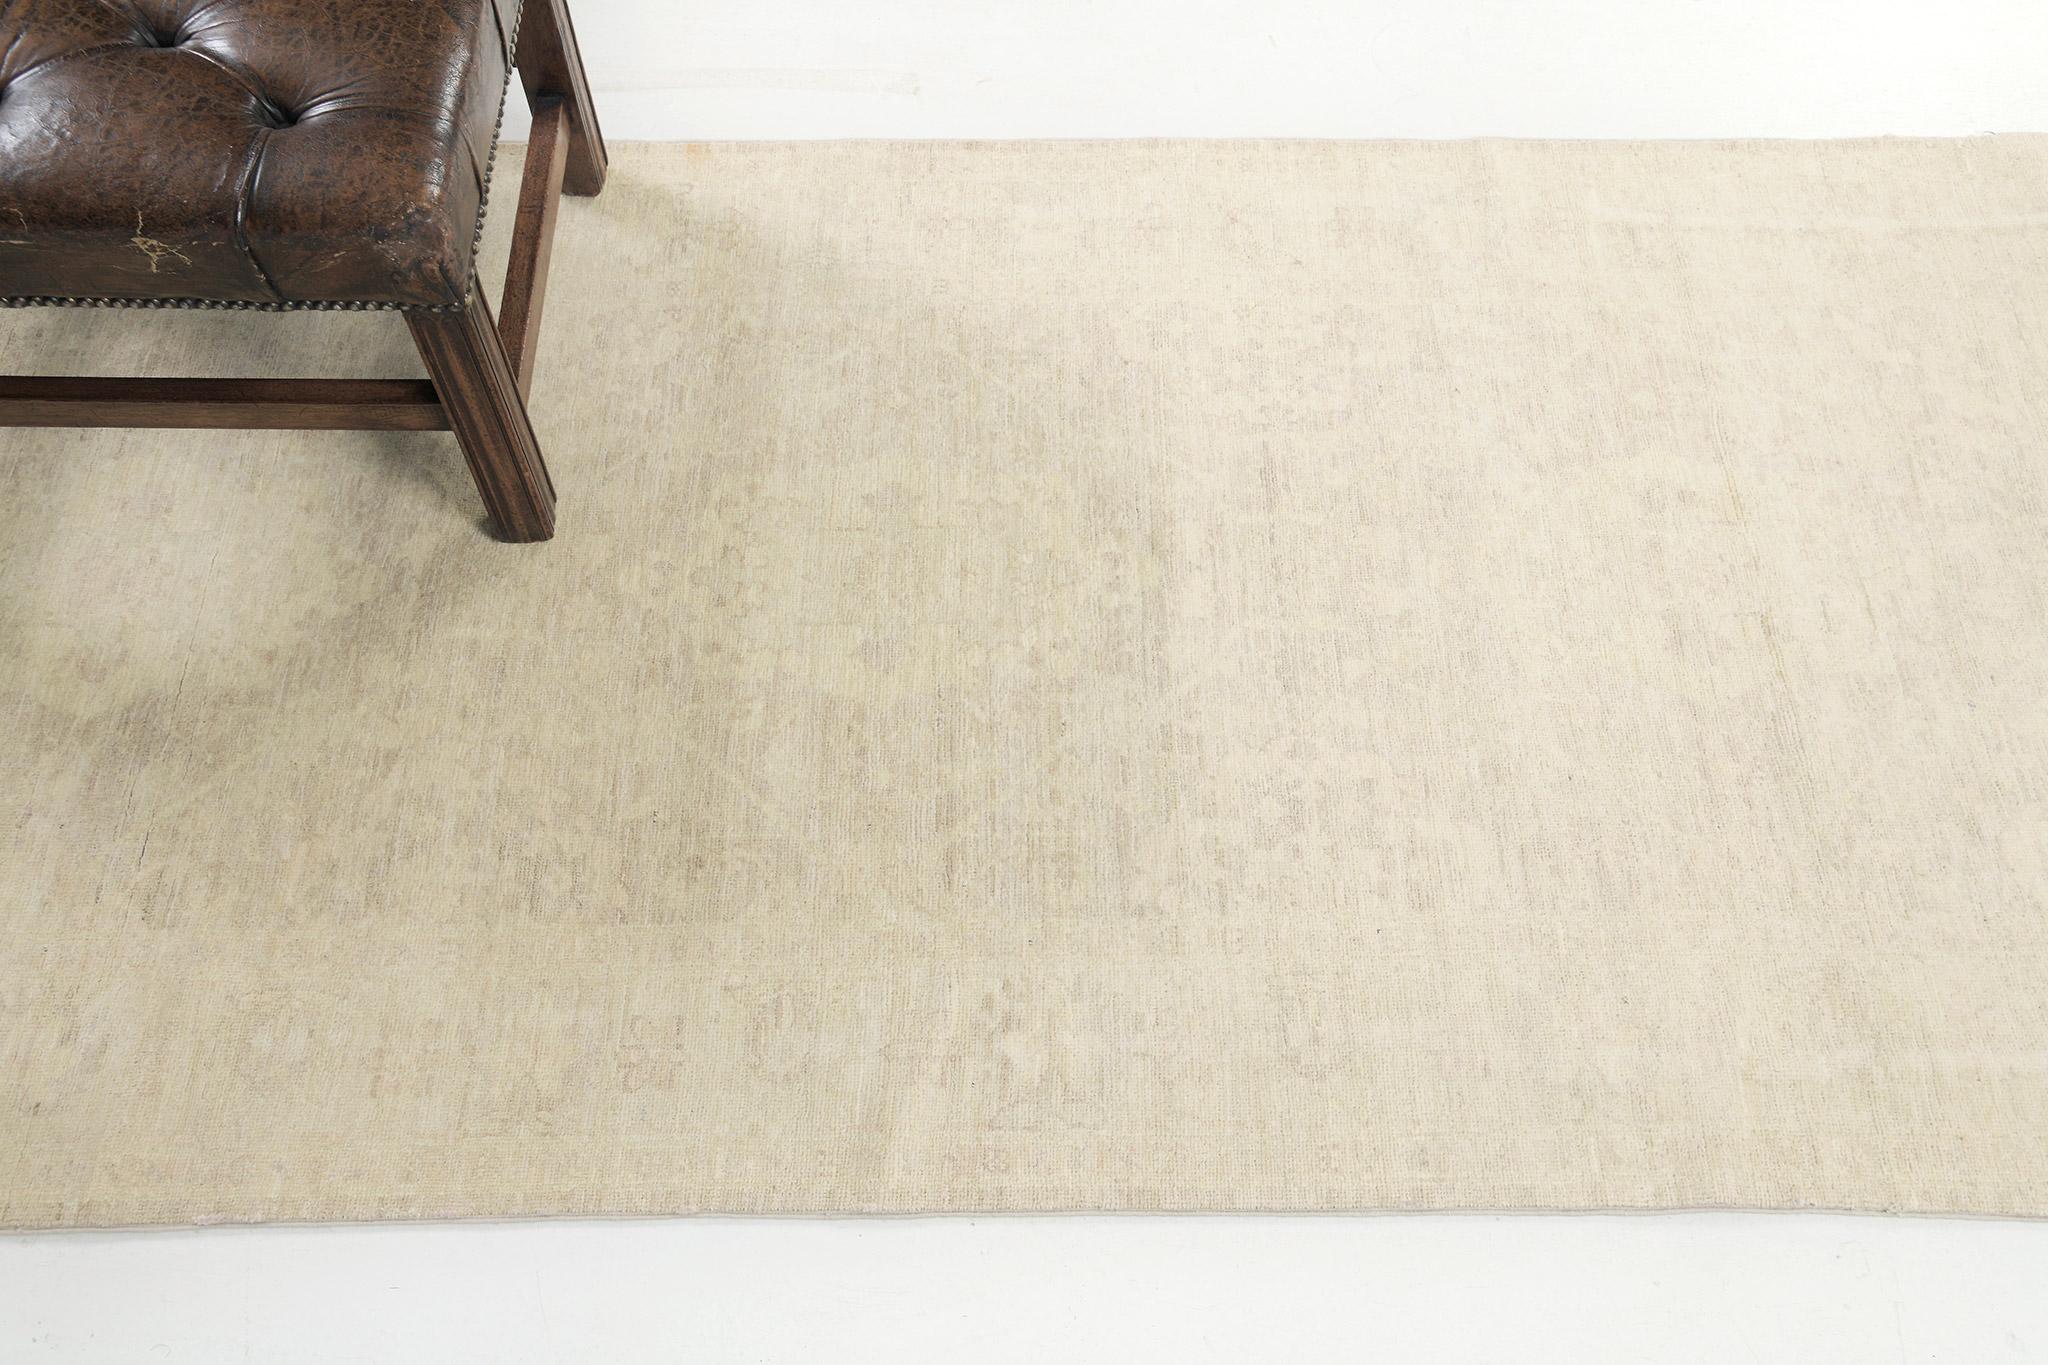 This precious hand-spun wool Tabriz Rug revival features a sage and neutral tone that makes this suitable for a whole host of applications. Series of muted embellishments in an allover design that matches the pattern and makes it looks more